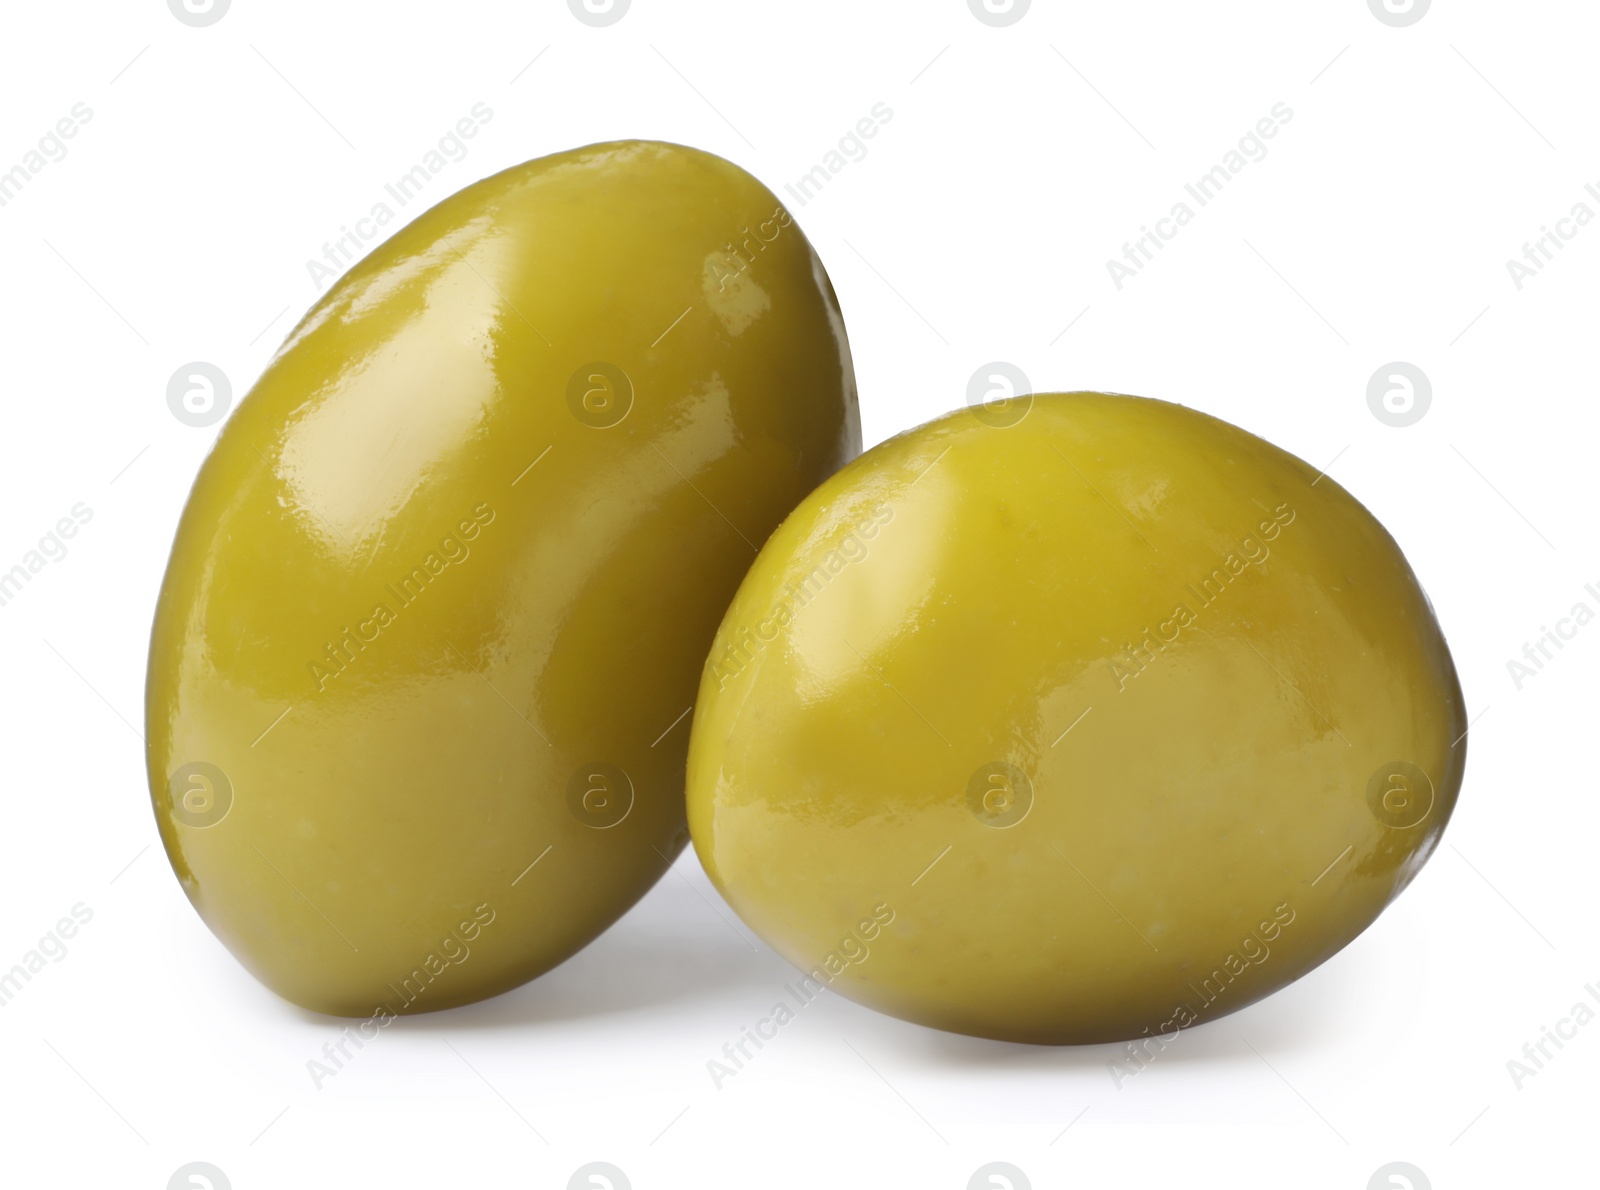 Photo of Two fresh green olives on white background